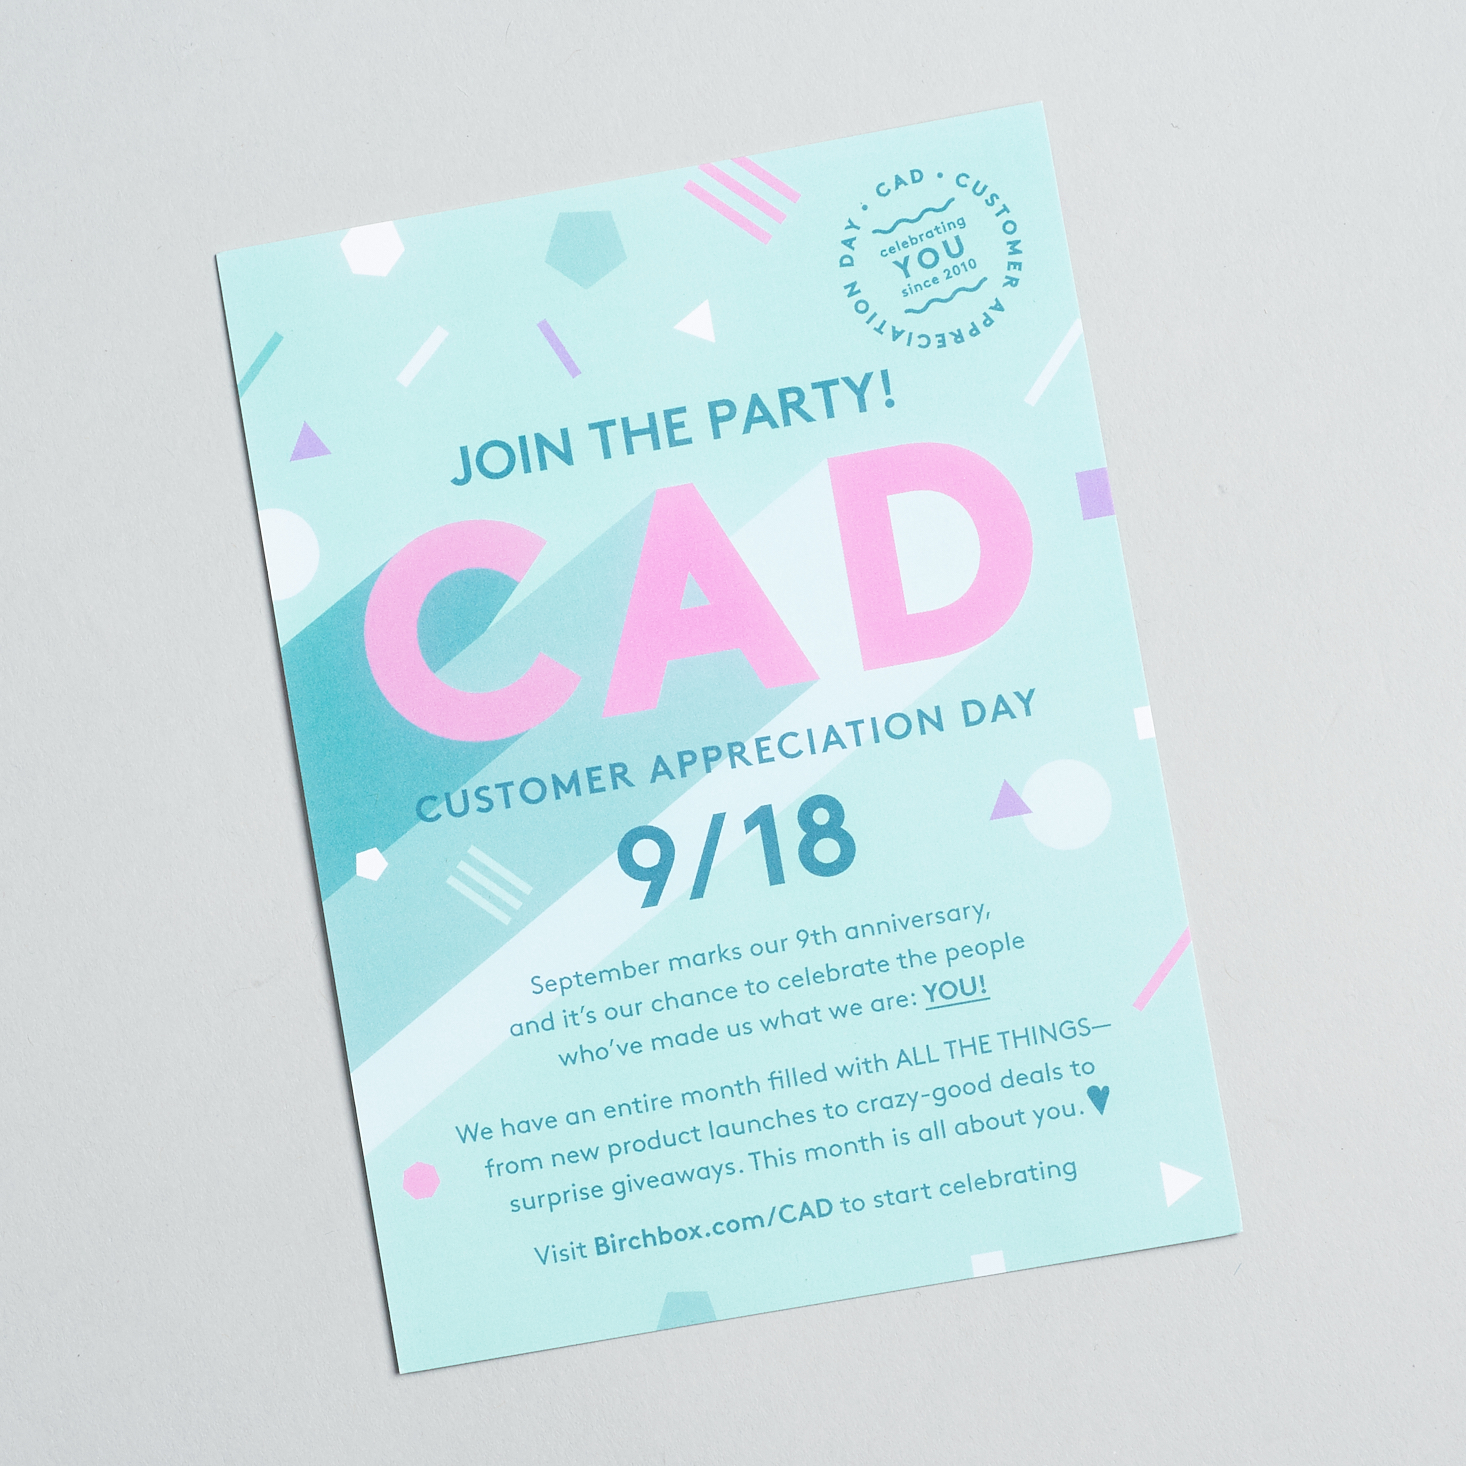 info card with CAD sale info